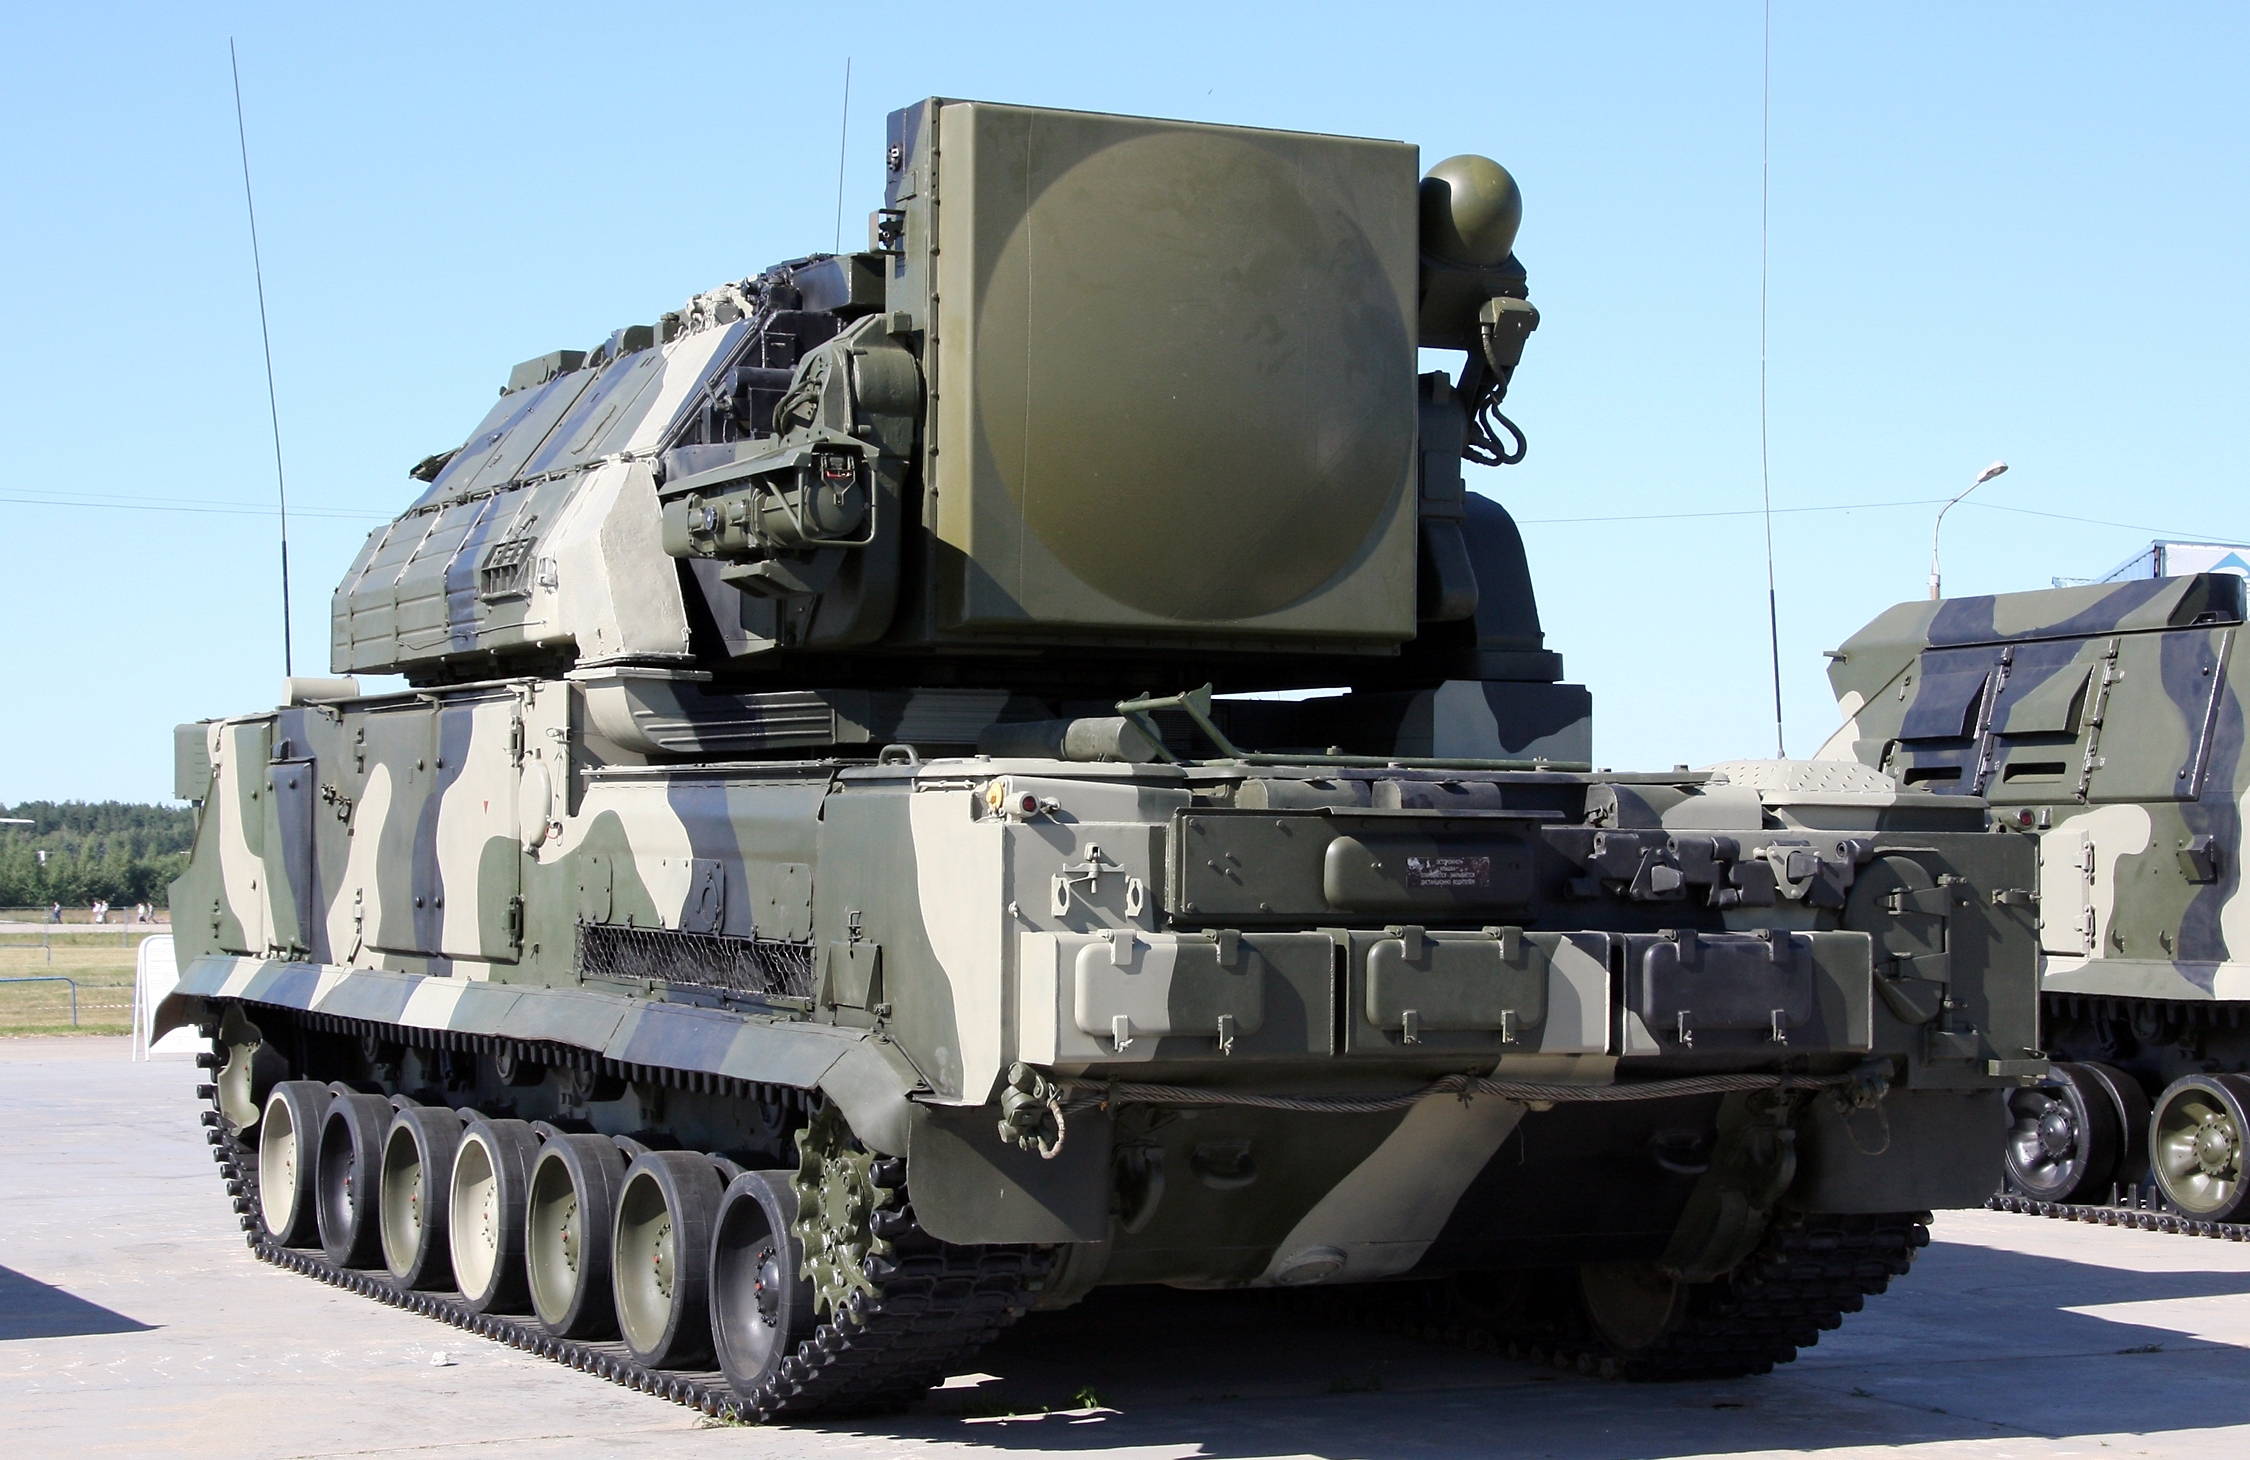 British Intelligence: The key limitations of Russian SA-15 Tor in the current war is likely the endurance of its crew